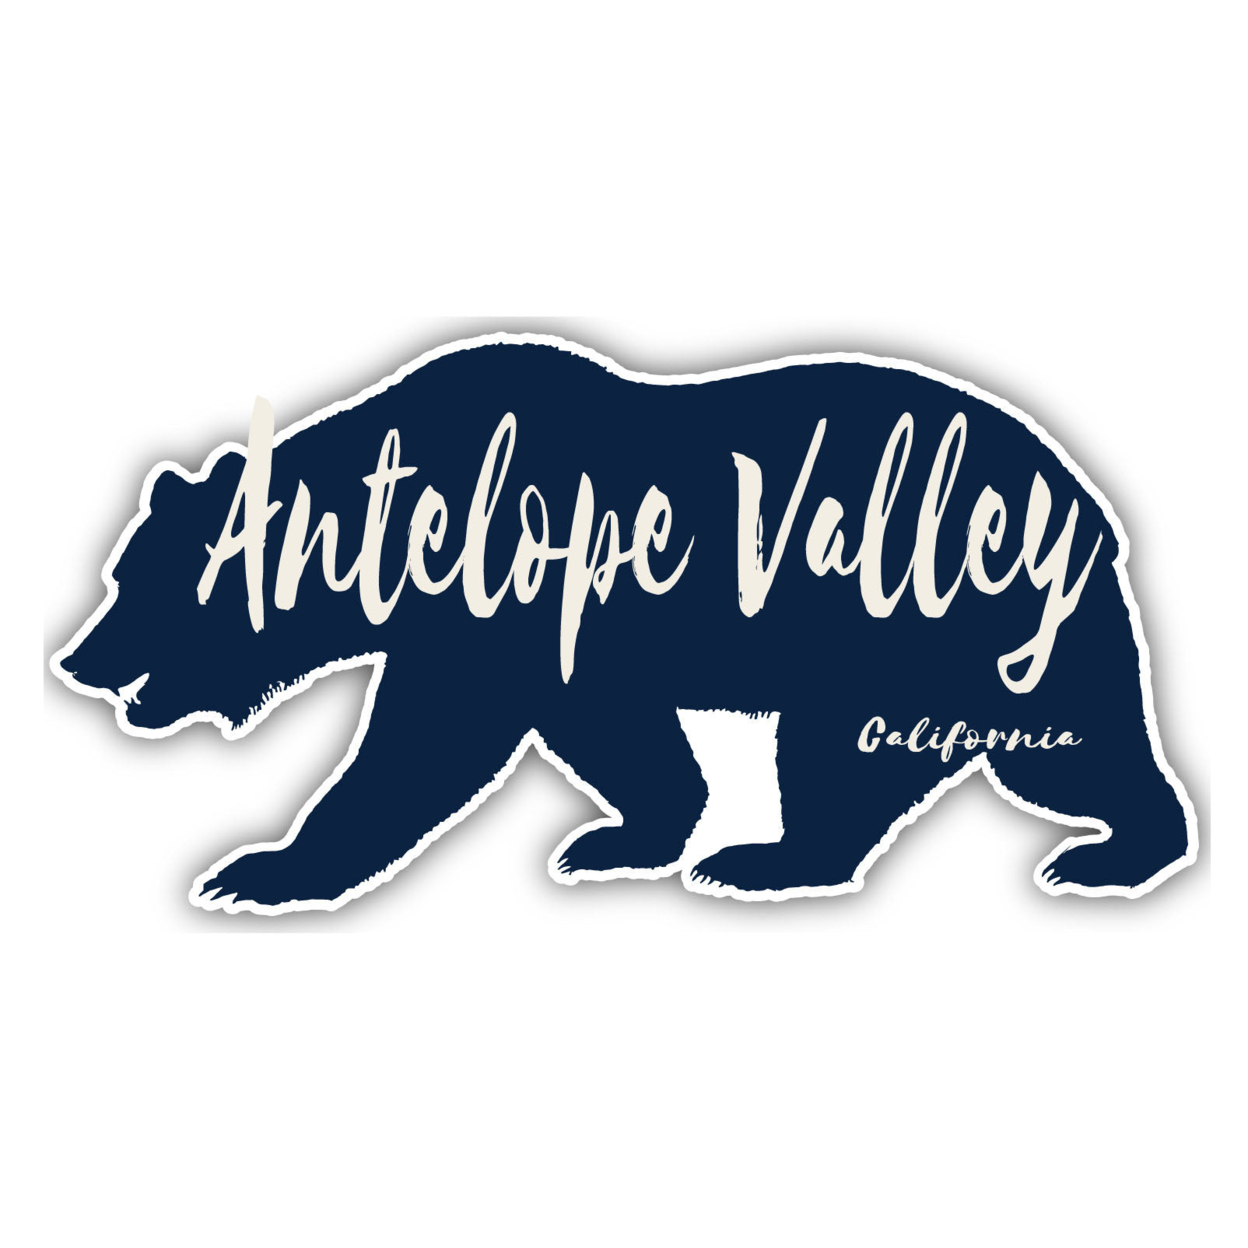 Antelope Valley California Souvenir Decorative Stickers (Choose Theme And Size) - 4-Pack, 2-Inch, Tent